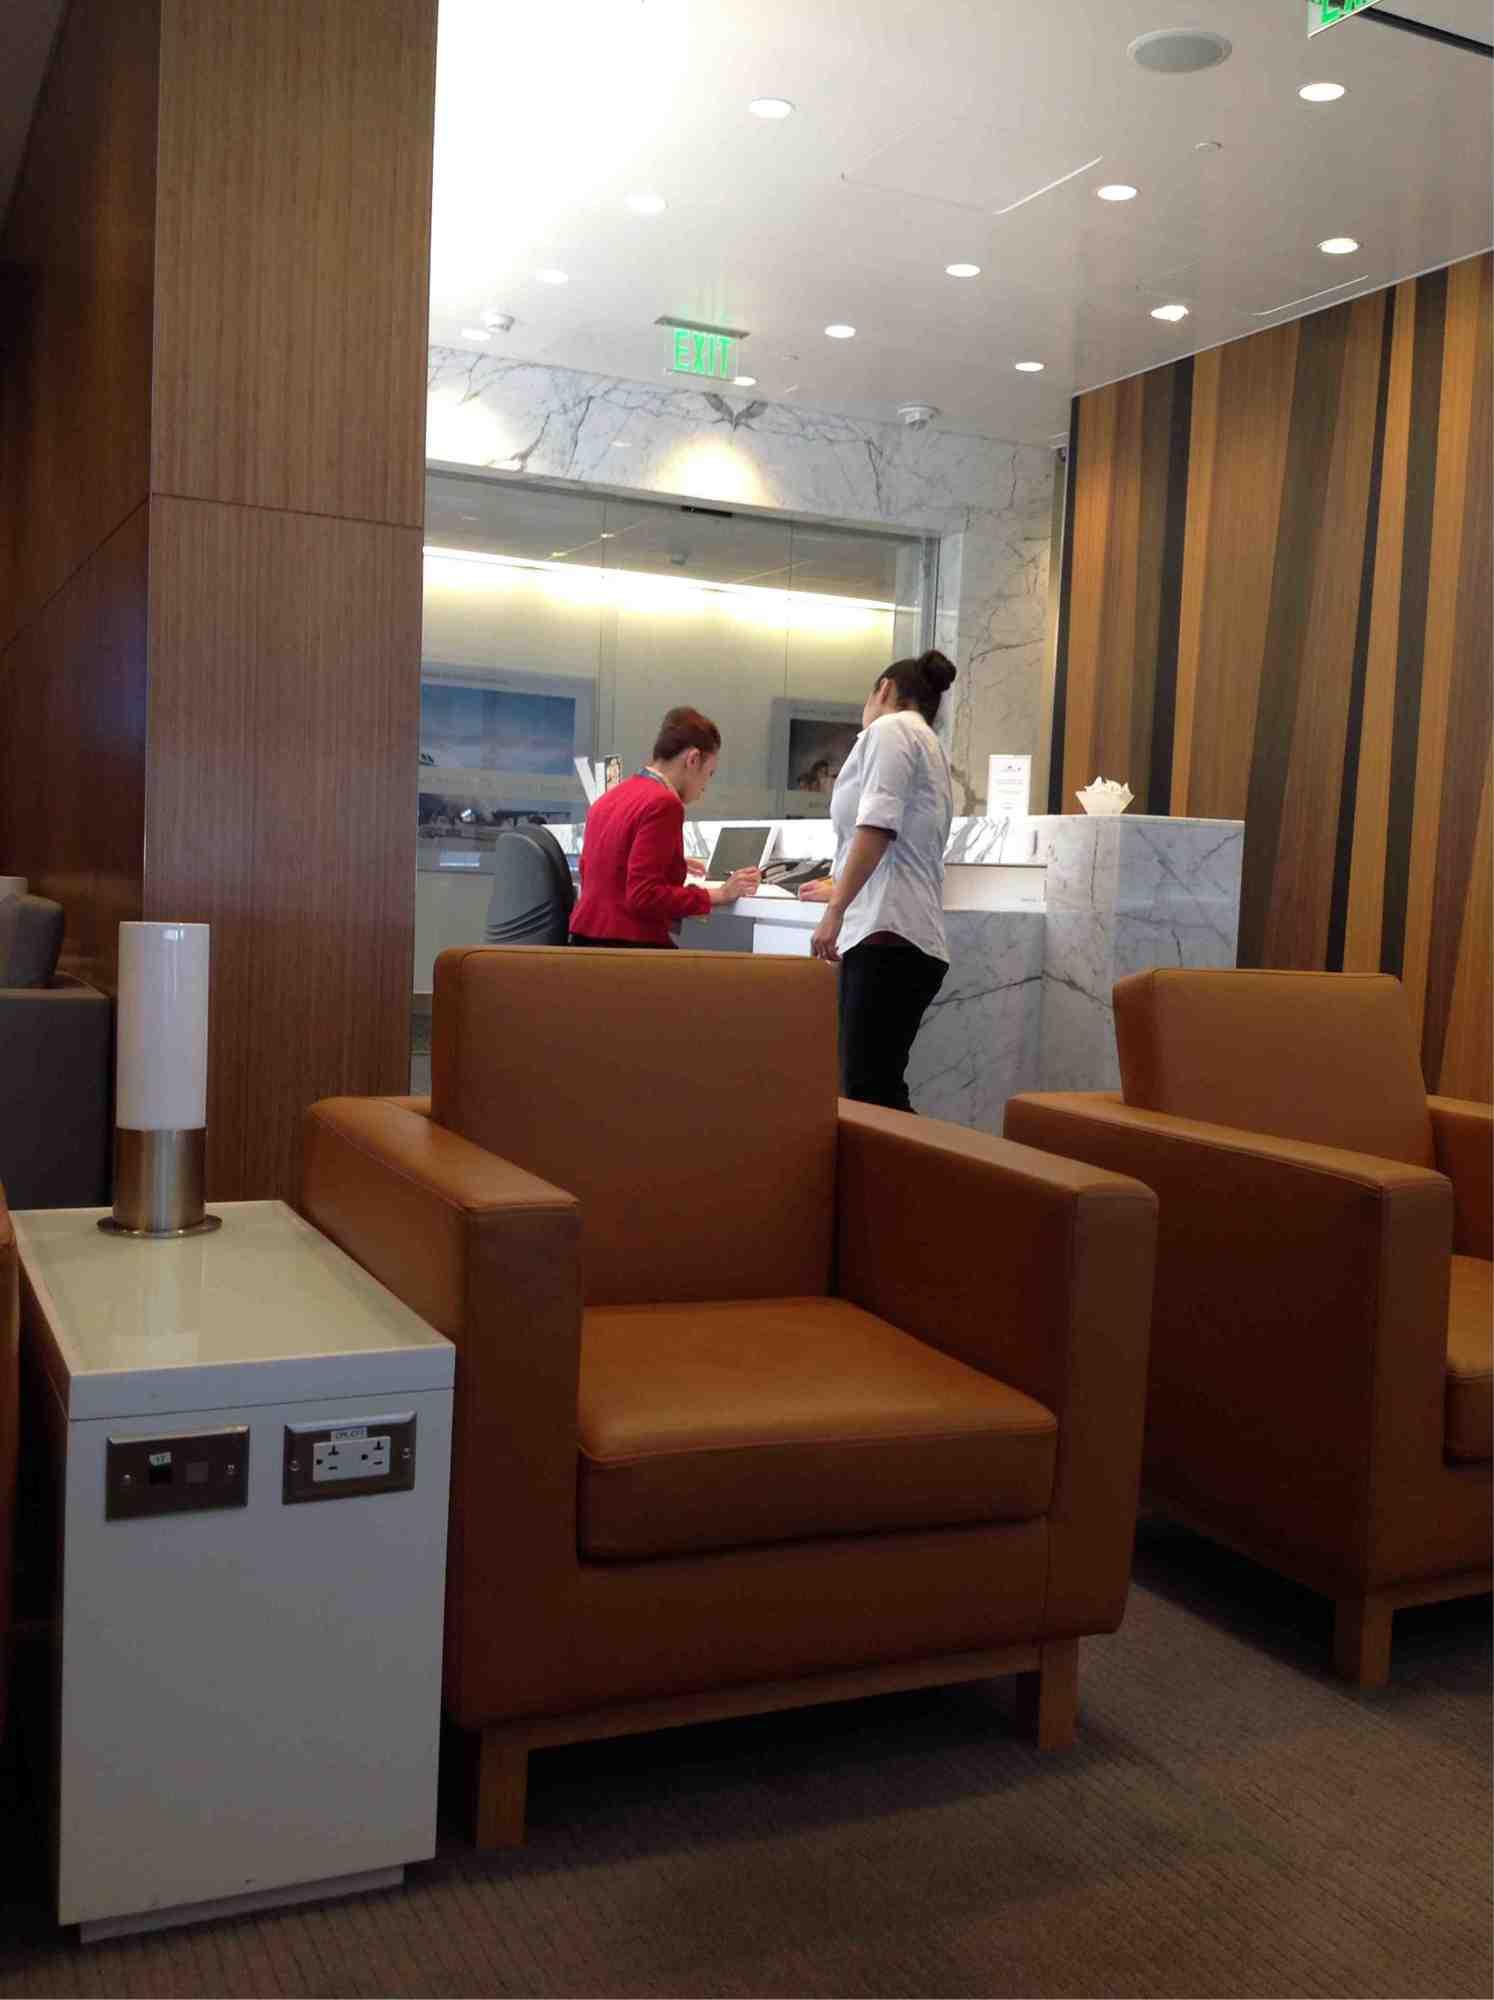 Cathay Pacific First and Business Class Lounge image 11 of 74